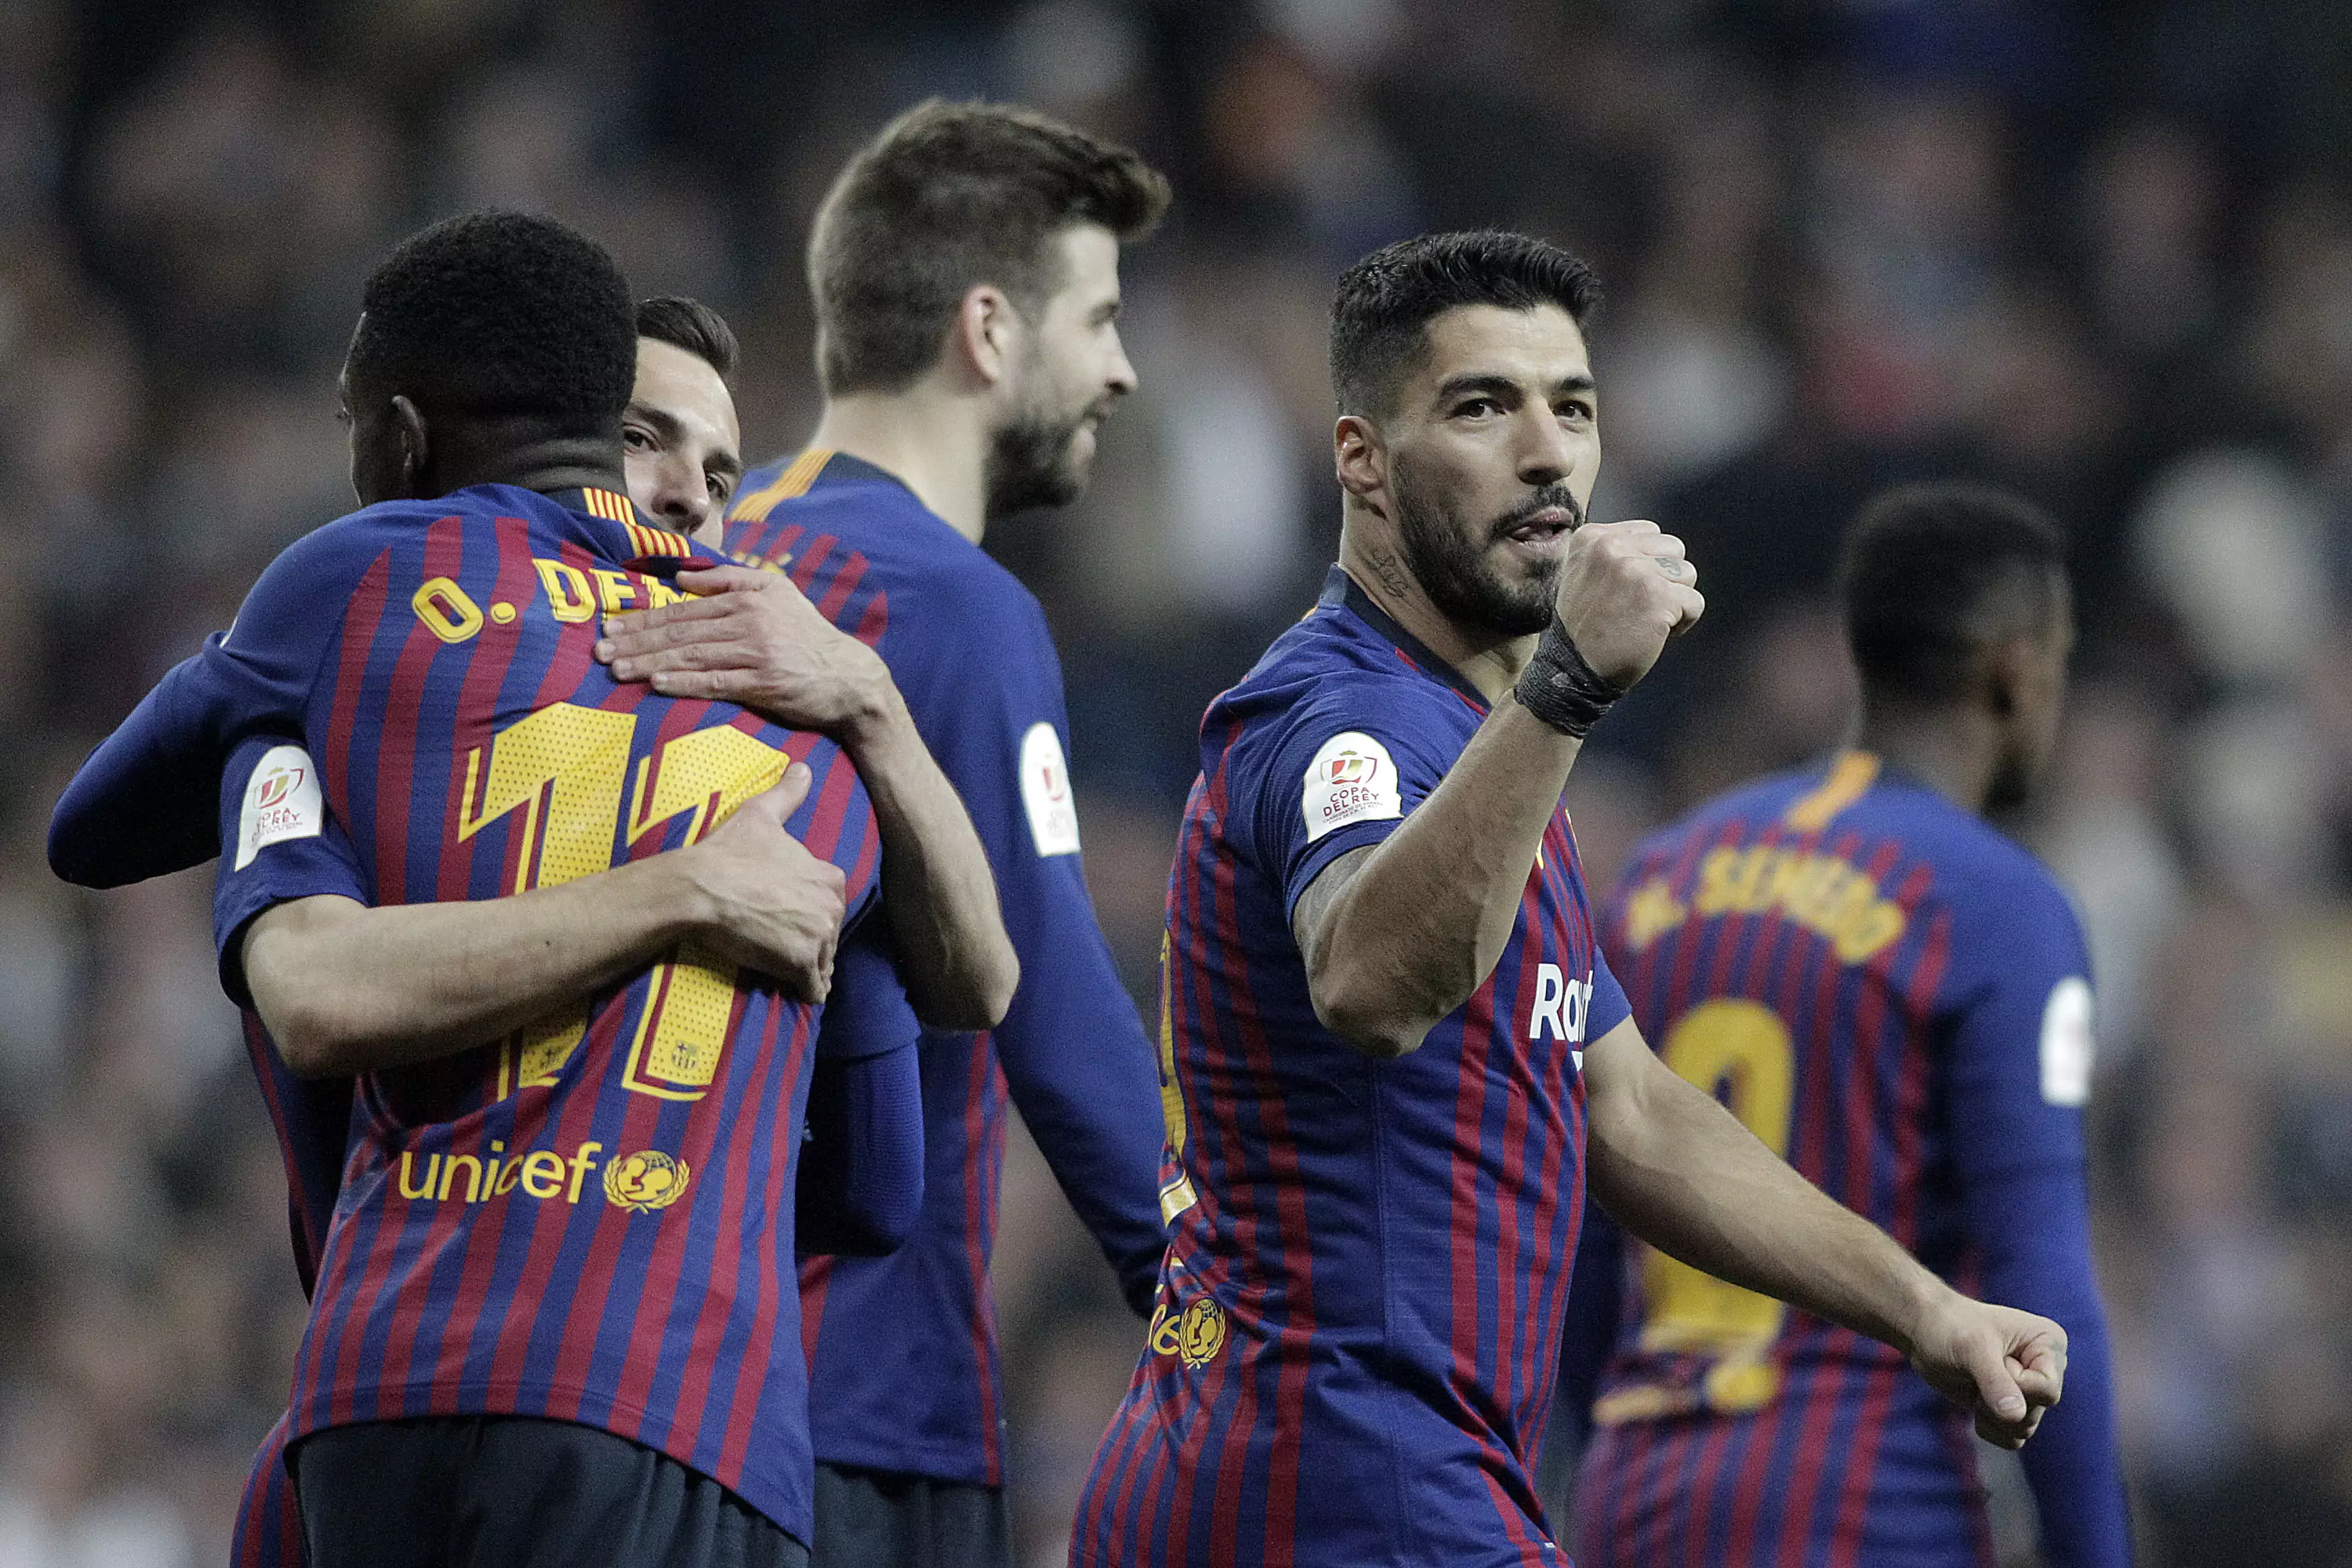 Barca celebrate their goal. Image: PA Images